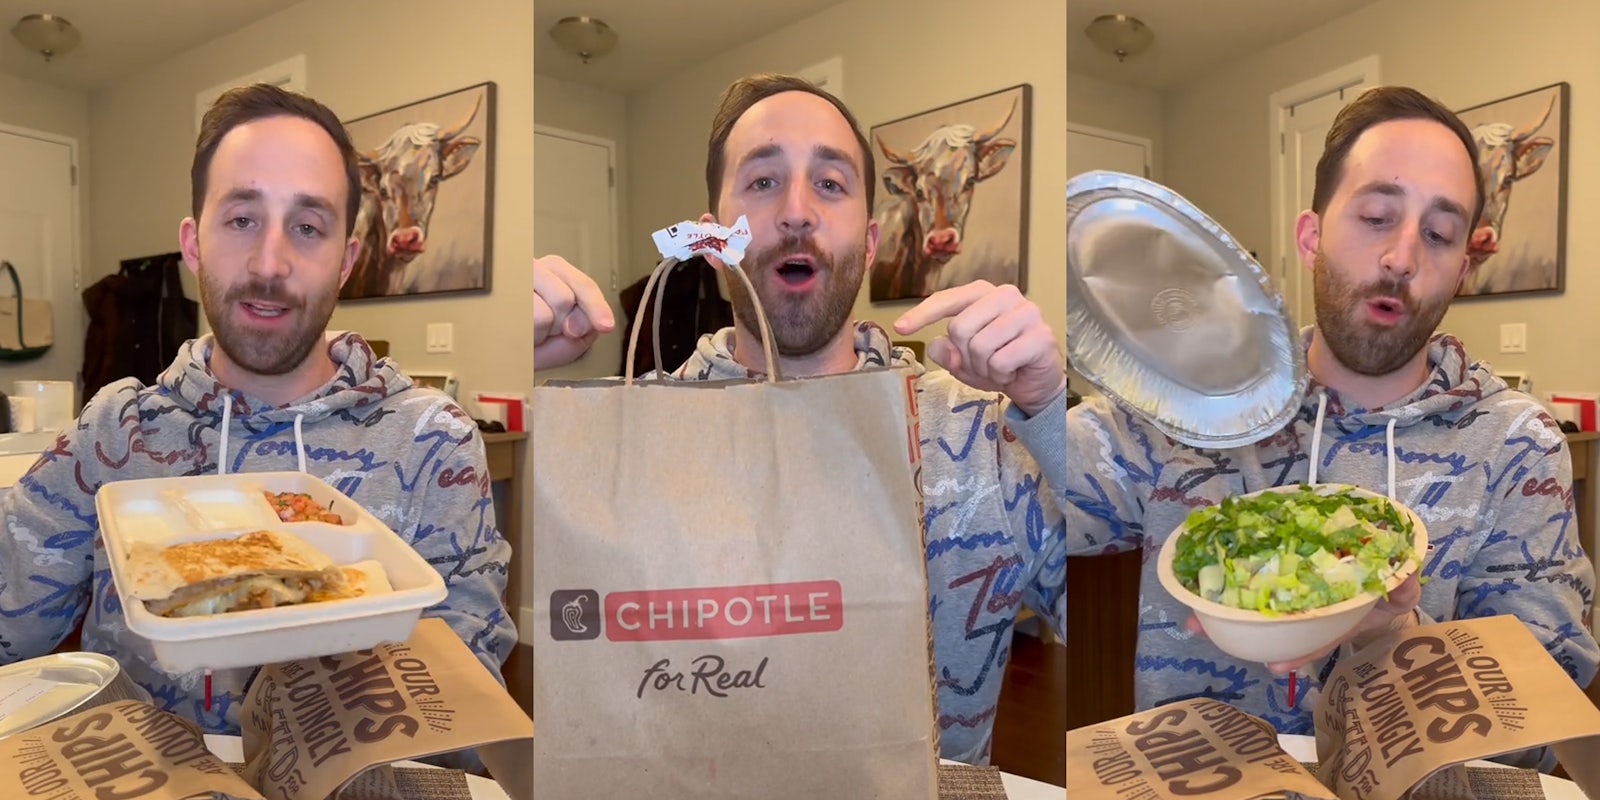 man speaking with Chipotle meal in hands (l) man pointing to Chipotle bag of food (c) man holding up Chipotle food (r)